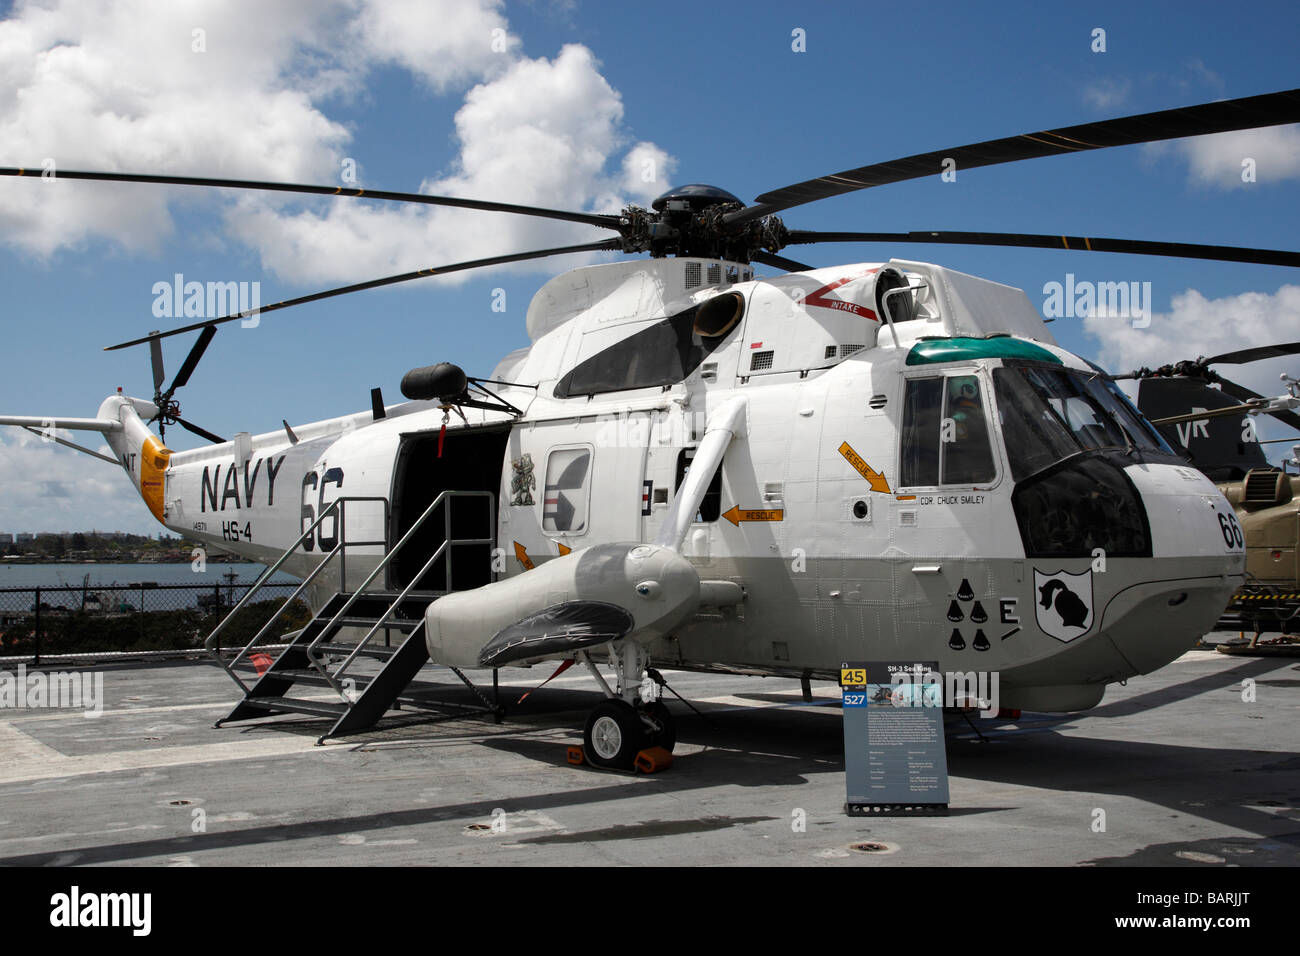 sikorsky sh-3 sea king helicopter on the flight deck of uss midway aircraft carrier museum embarcadero san diego california usa Stock Photo